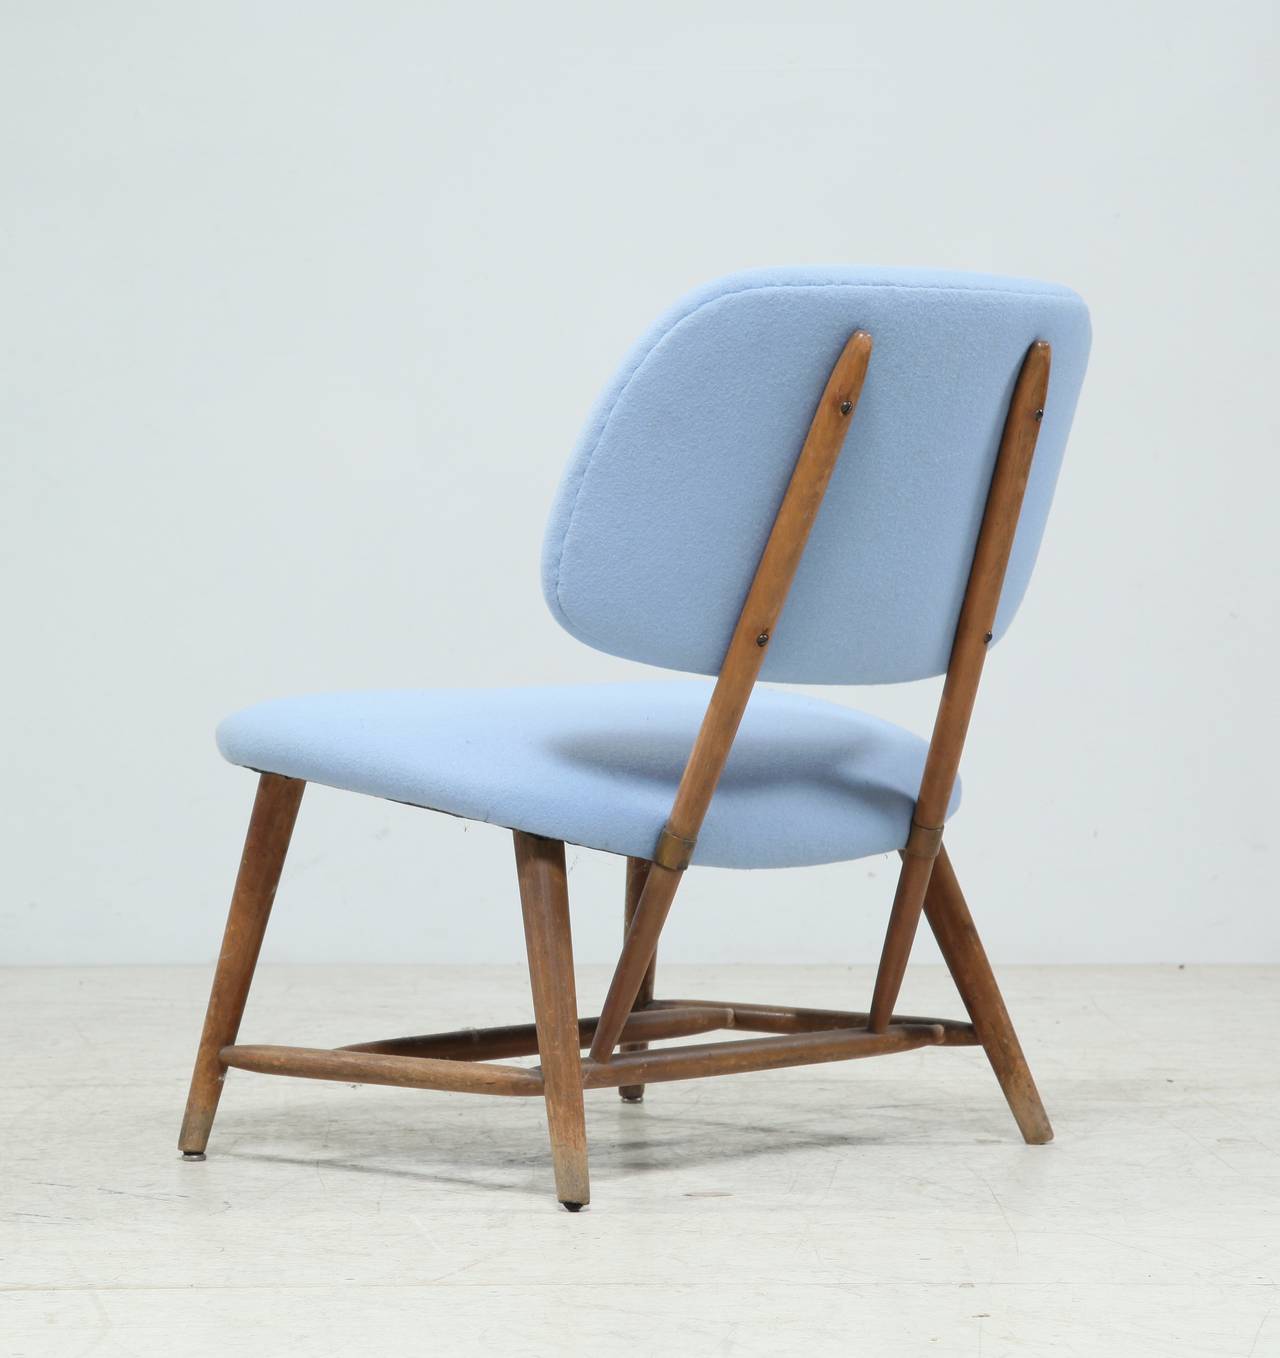 Light and transparent additional chair by Alf Svensson for Ljungs Industrier AB. At the time it was sold as a TV chair, due to its comfortable position.

Reupholstered with a powder blue Kvadrat fabric.